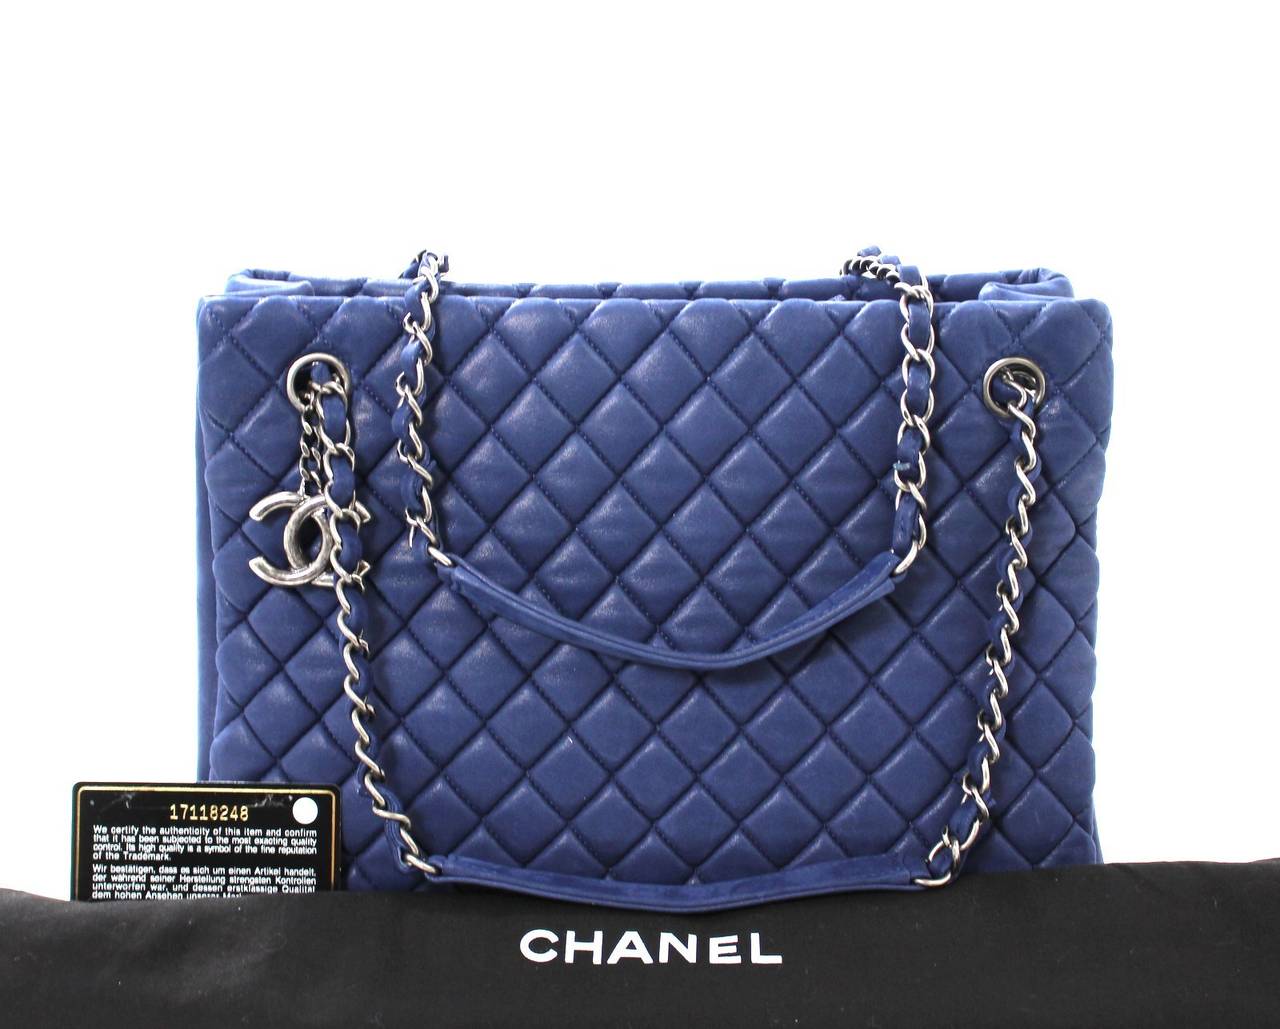 Chanel Cobalt Blue Leather Tote 6